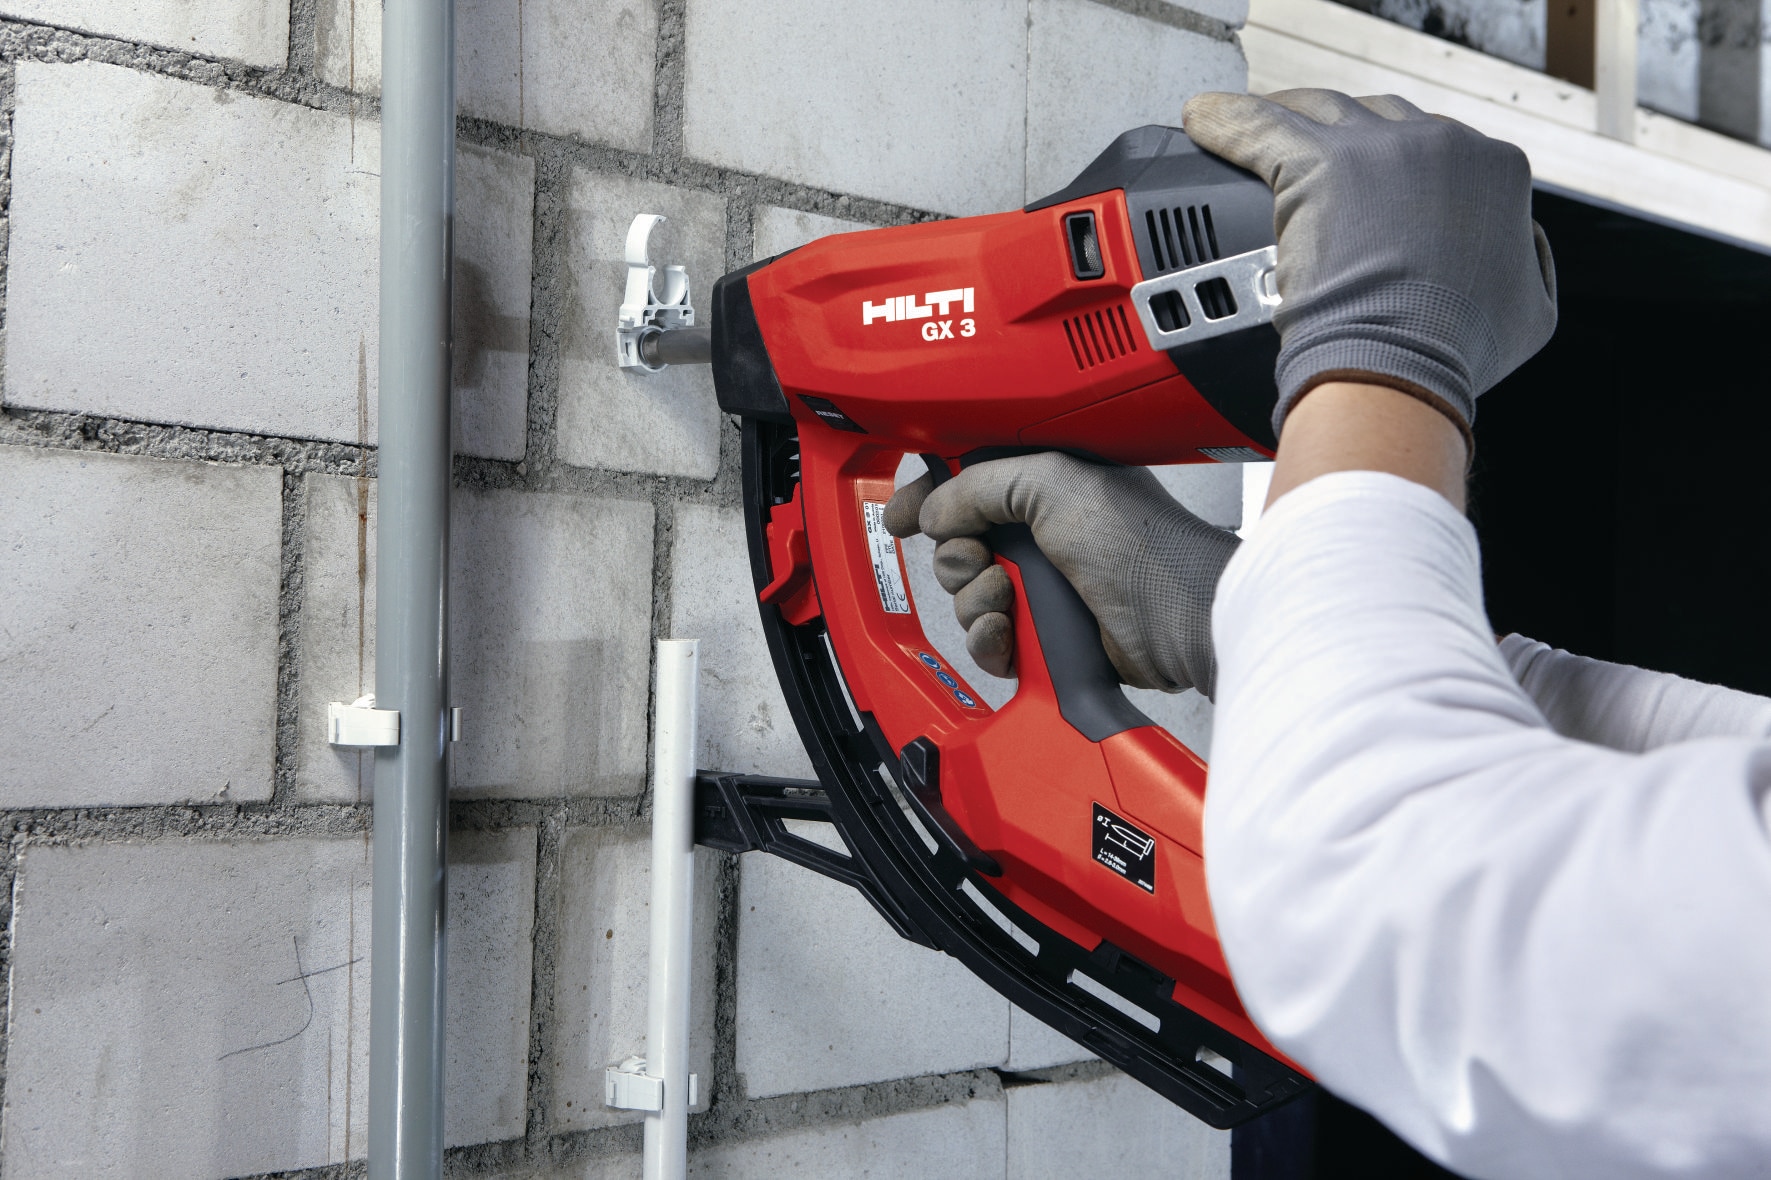 Hilti GX 120 Me Gm40 Gas Powered Actuated Nail Gun Fastening Tool for sale online